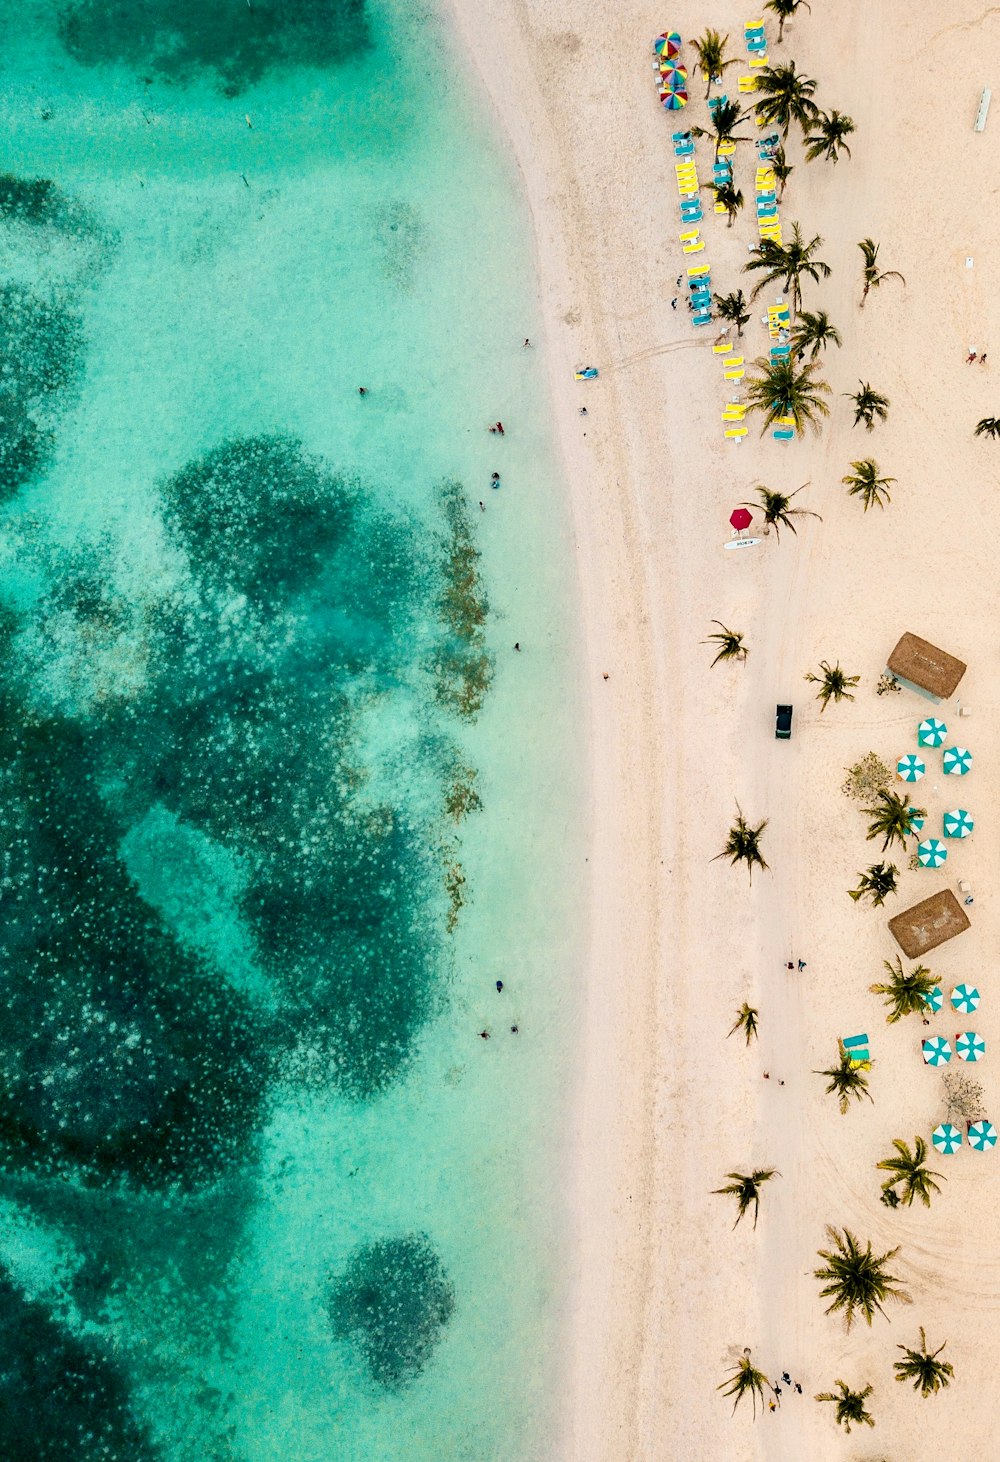 aerial view of people on beach during daytime